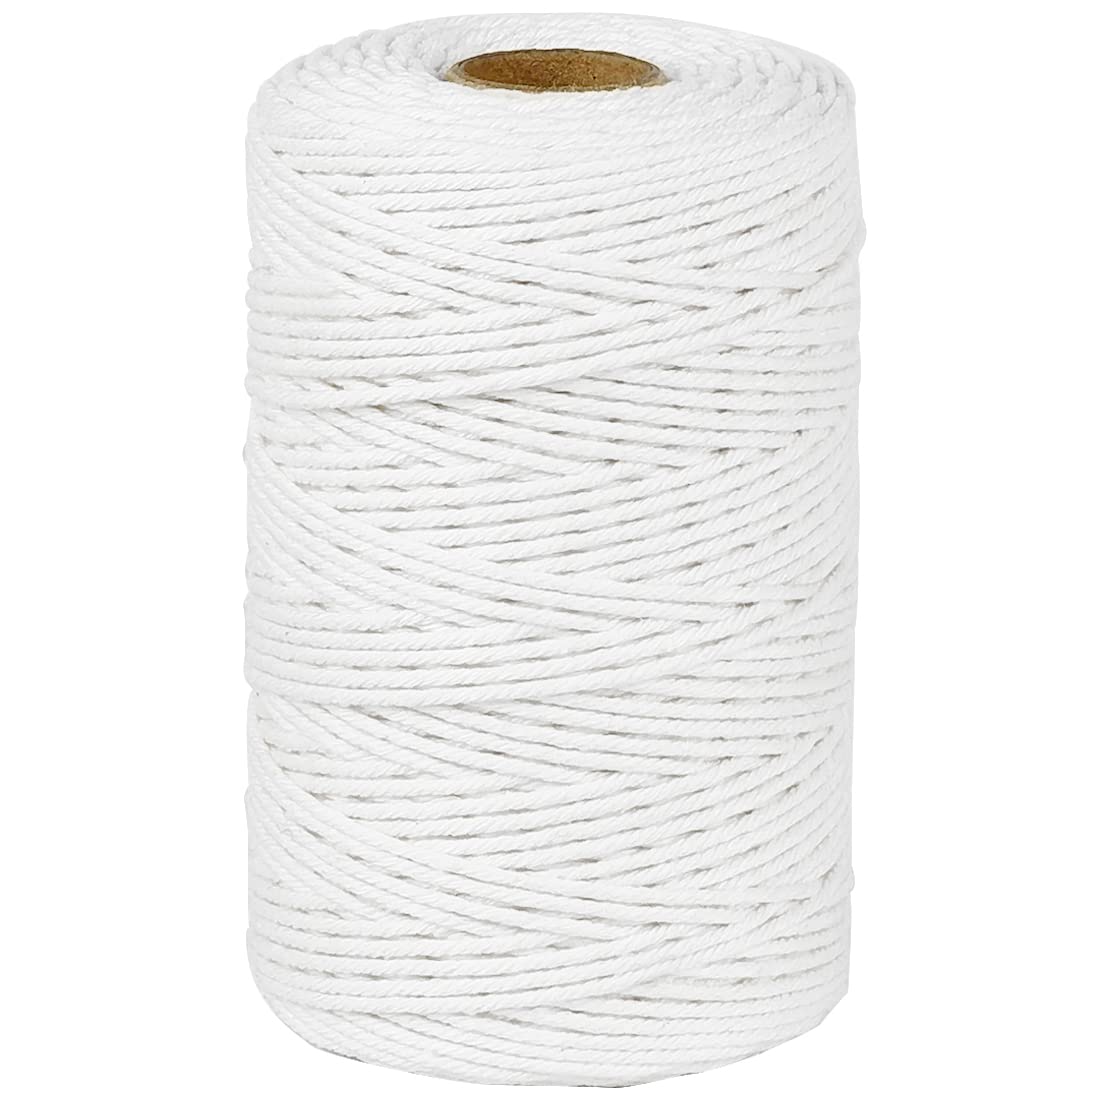 PerkHomy Cotton Butchers Twine String 500 Feet 2mm Twine for Cooking Food Safe Crafts Bakers Kitchen Butcher Meat Turkey Sausage Roasting Gift Wrapping Gardening Crocheting Knitting